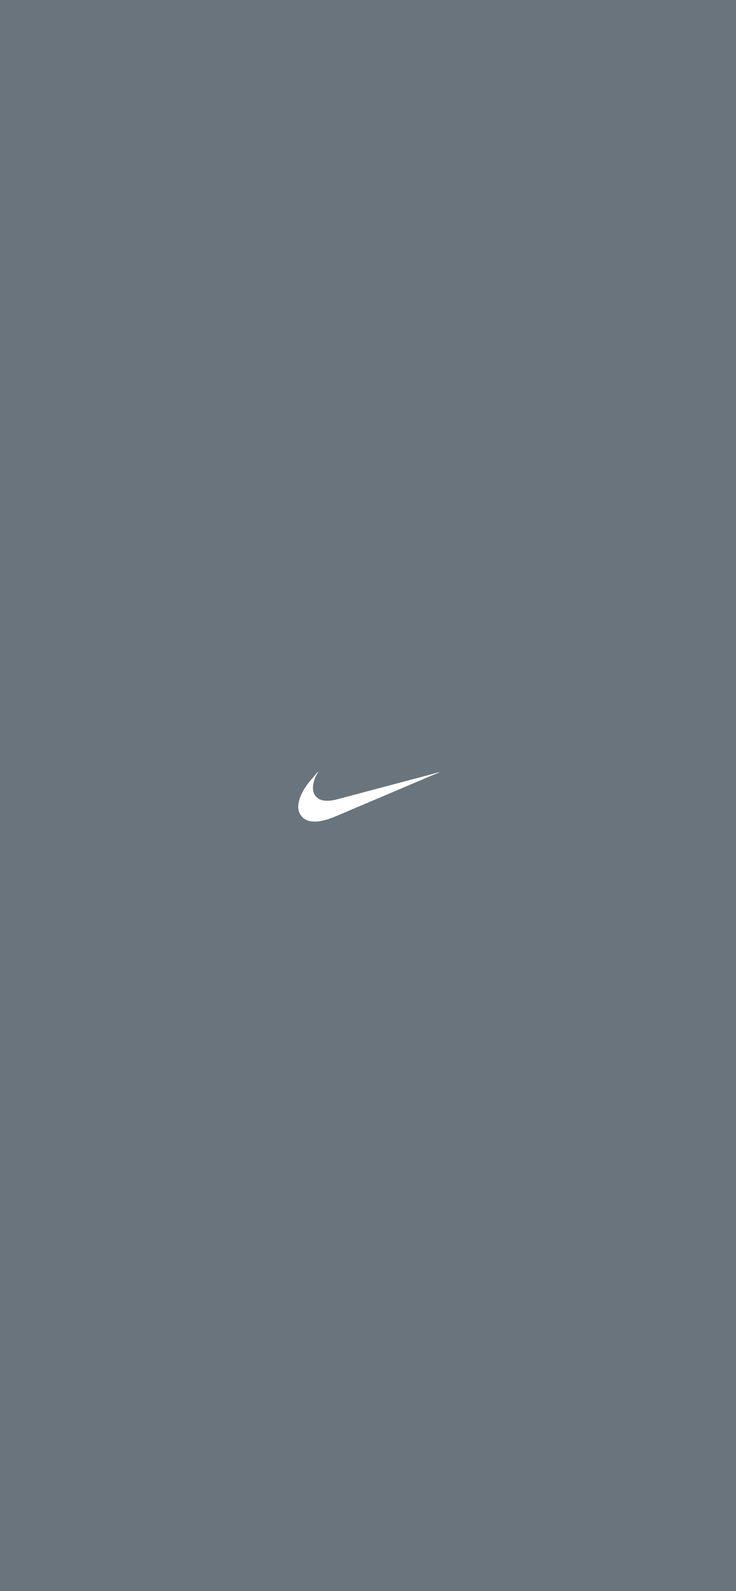 State Gray Background Nike Logo In Wallpaper